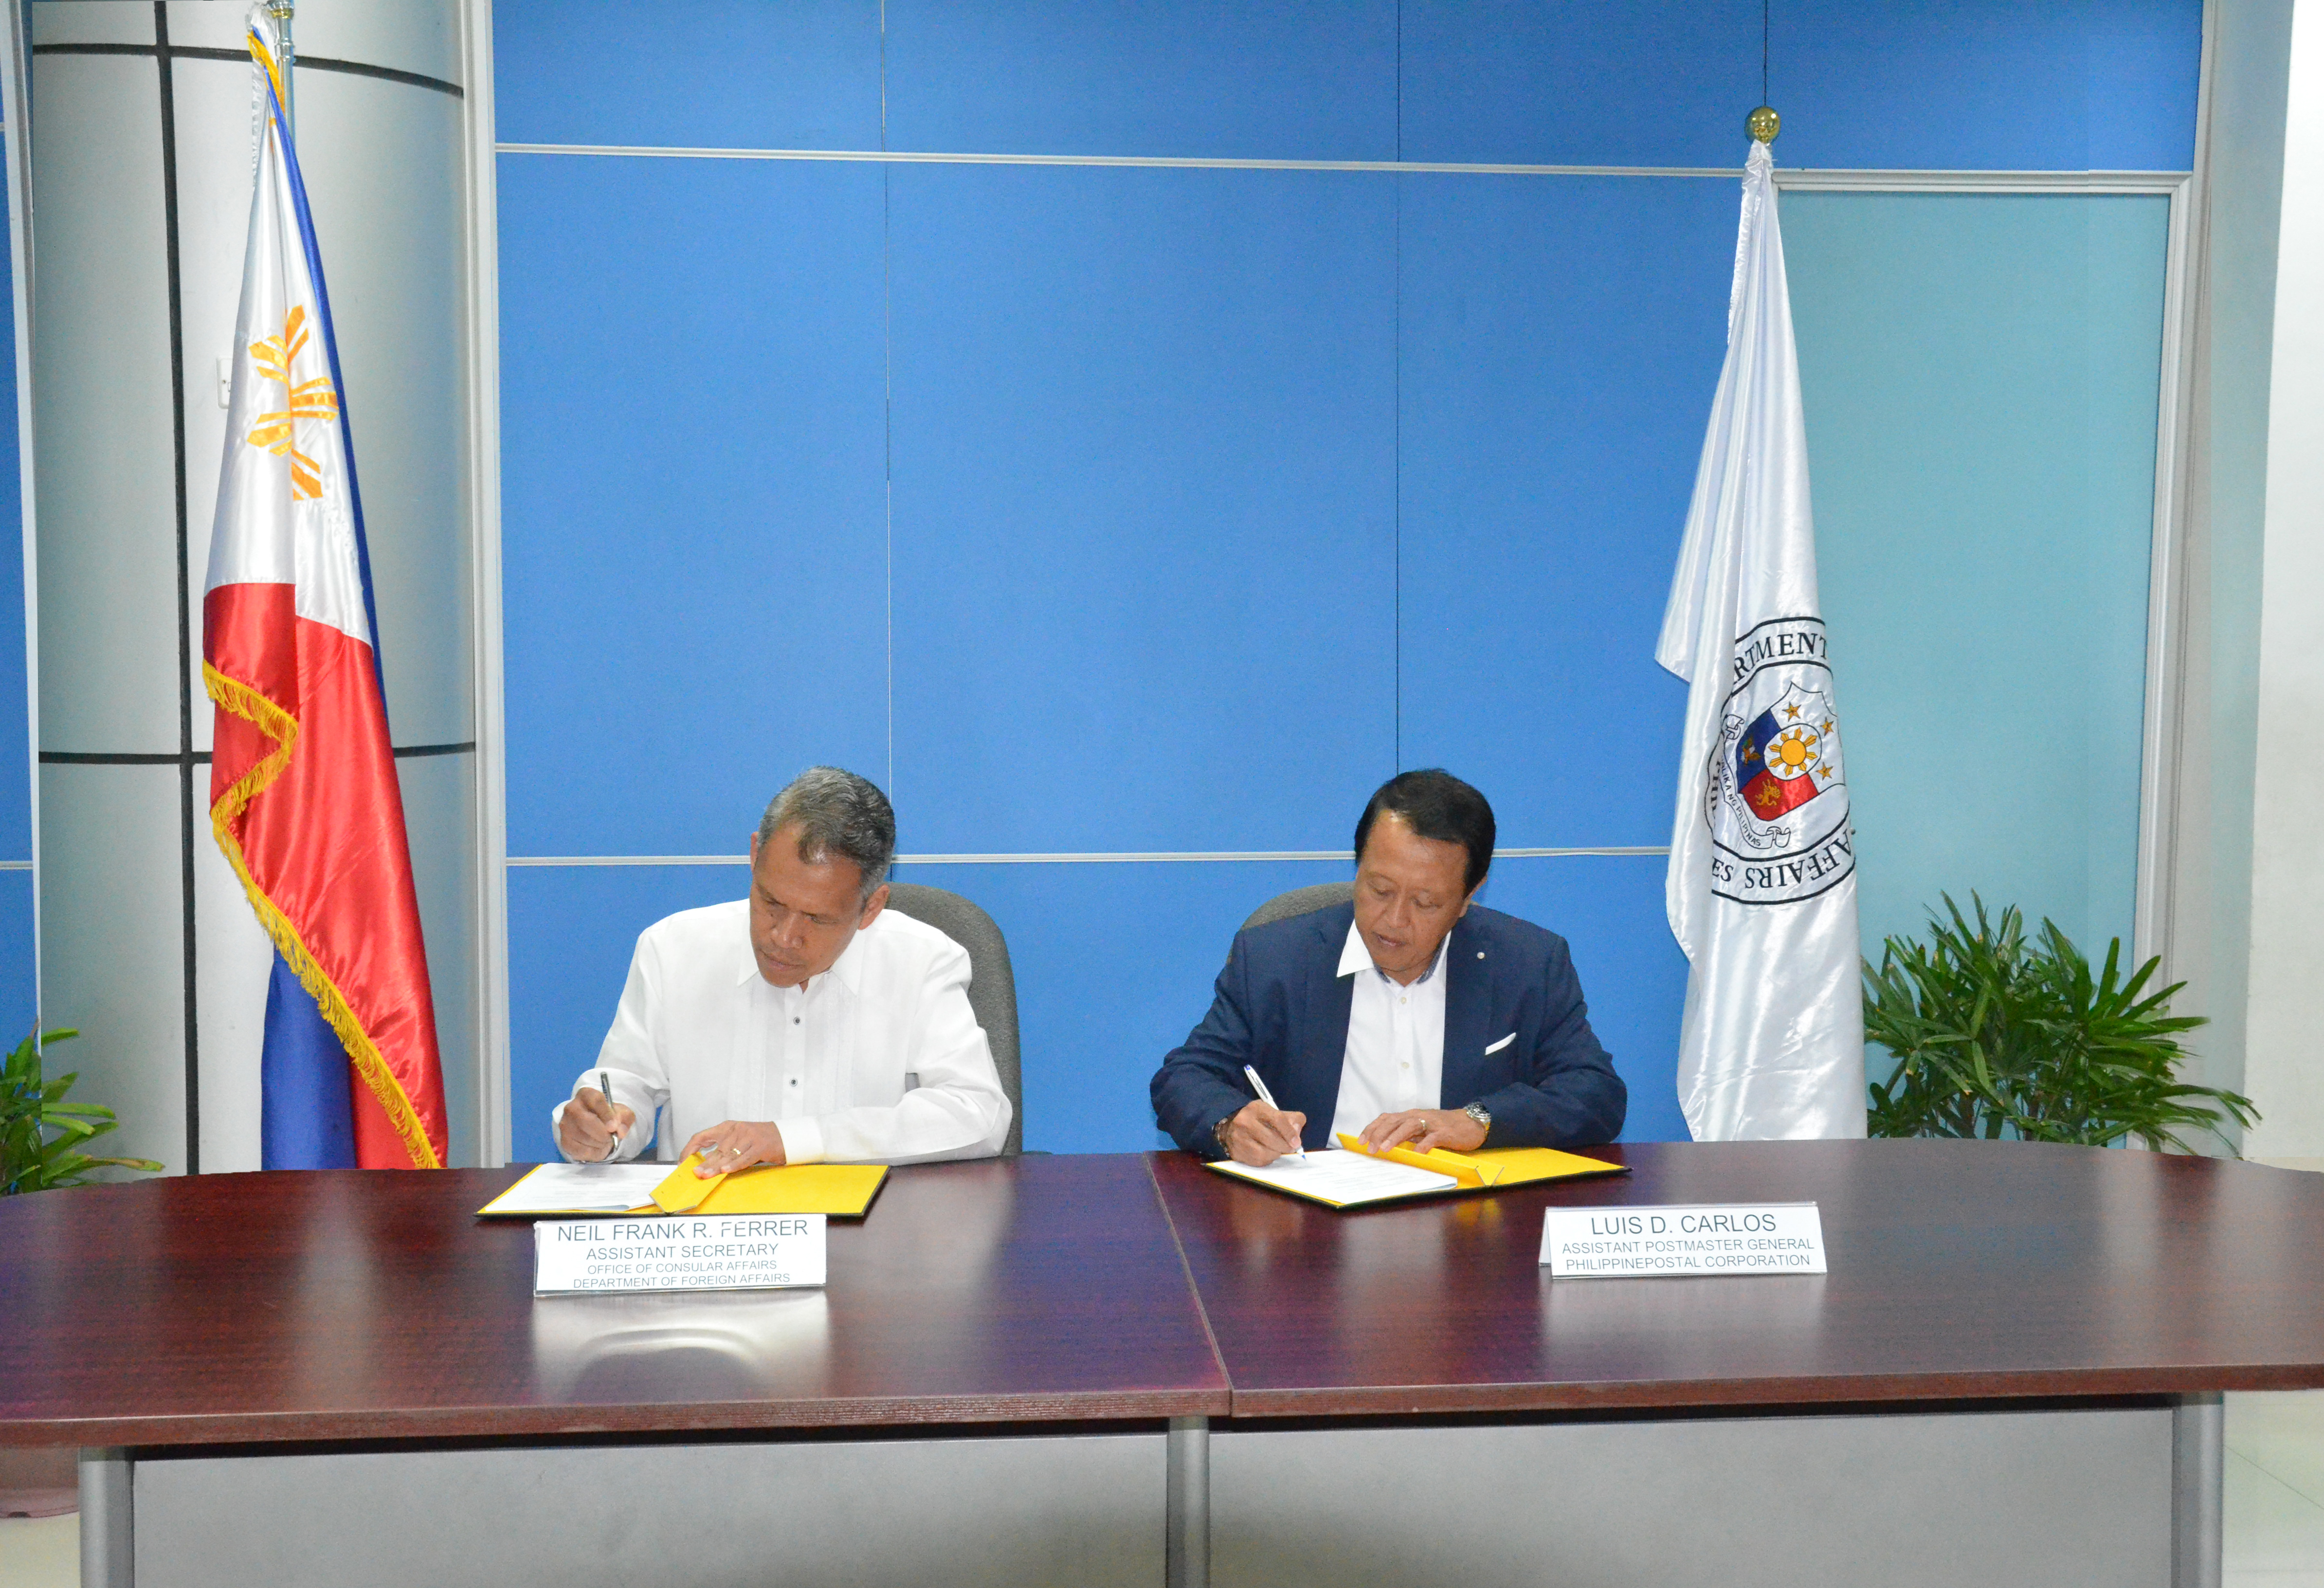 MoA signing of the acceptance of PhlPost IDs for PH passport applications